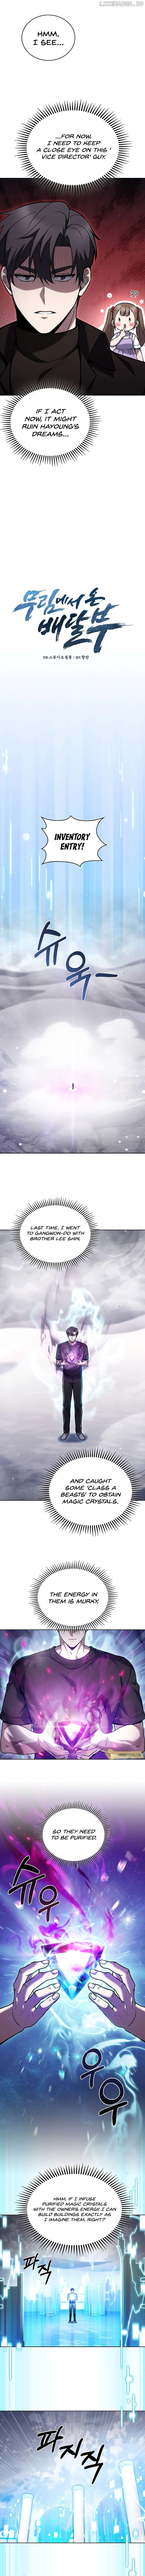 Delivery Man From Murim - chapter 28 - #2